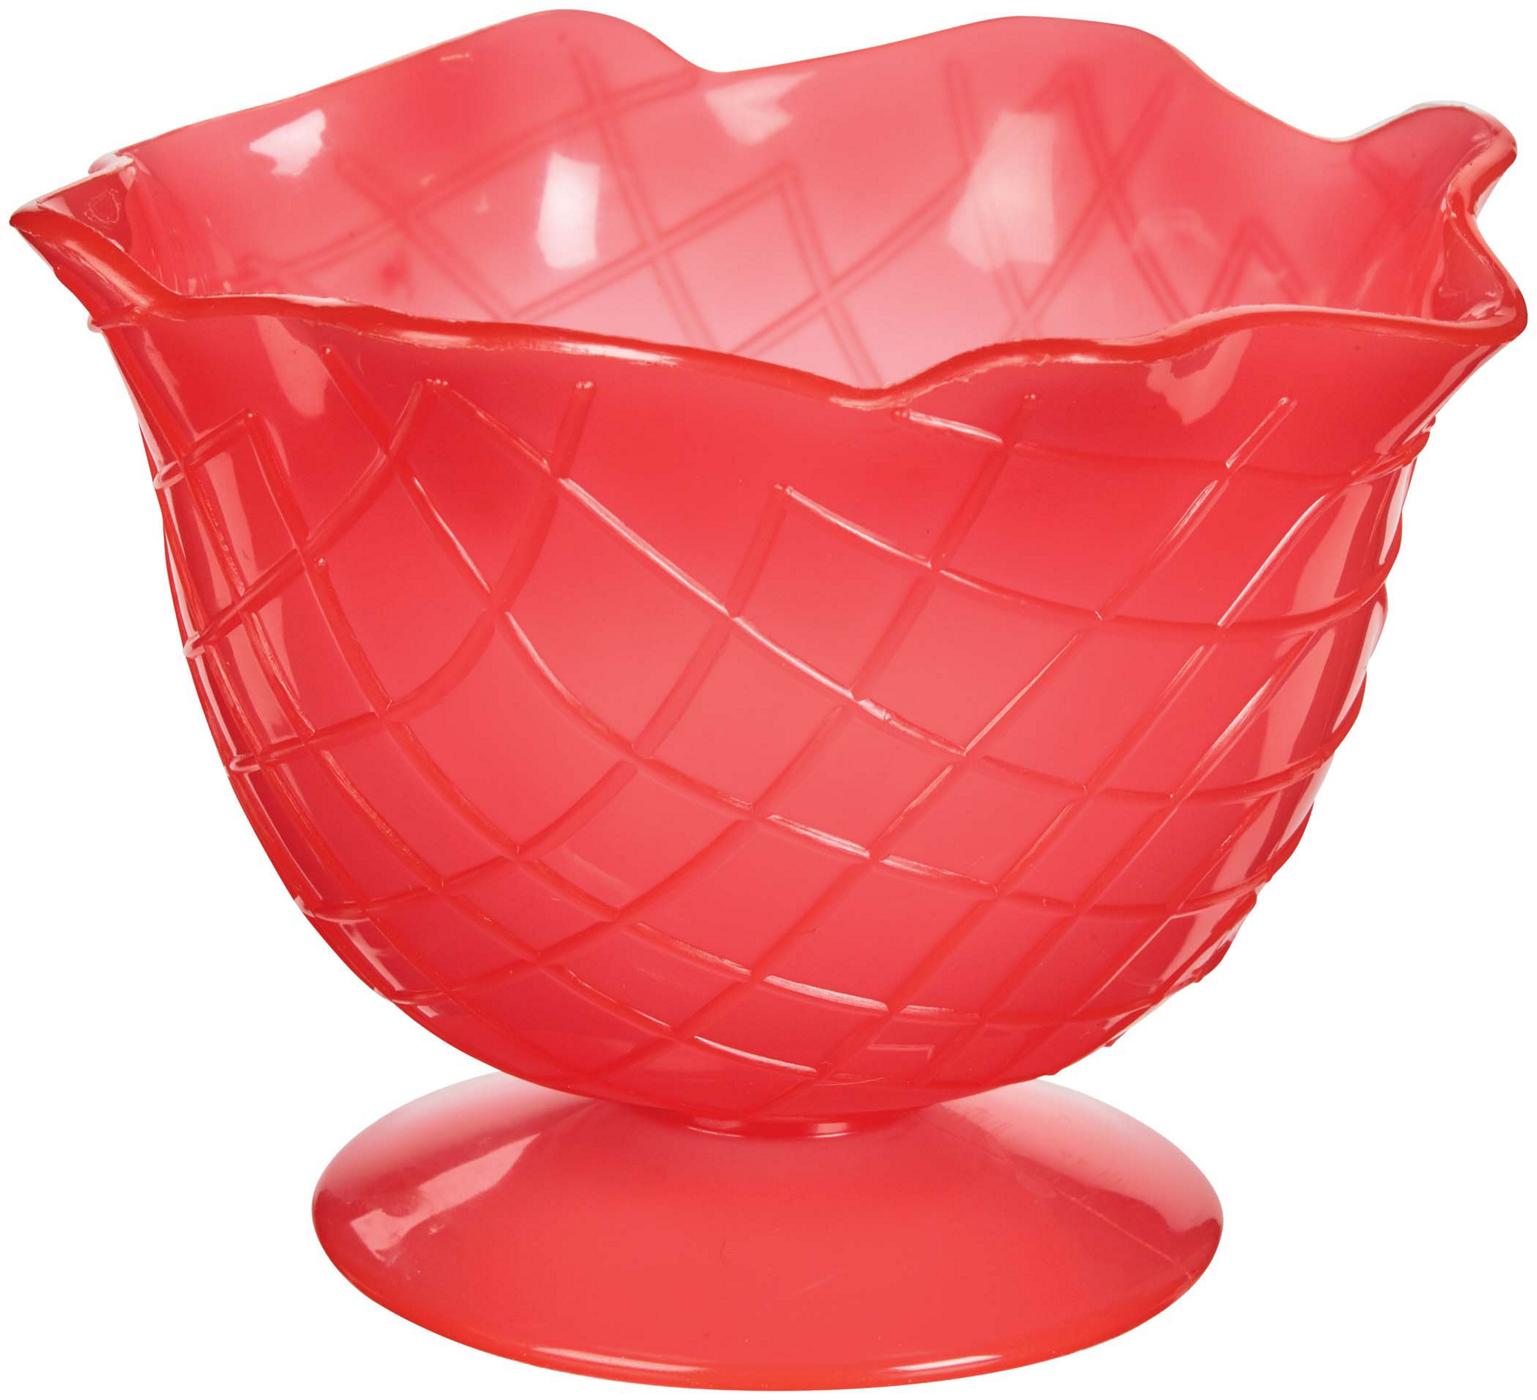 Dining Style Ice Cream Bowl Assorted Colors; image 1 of 2